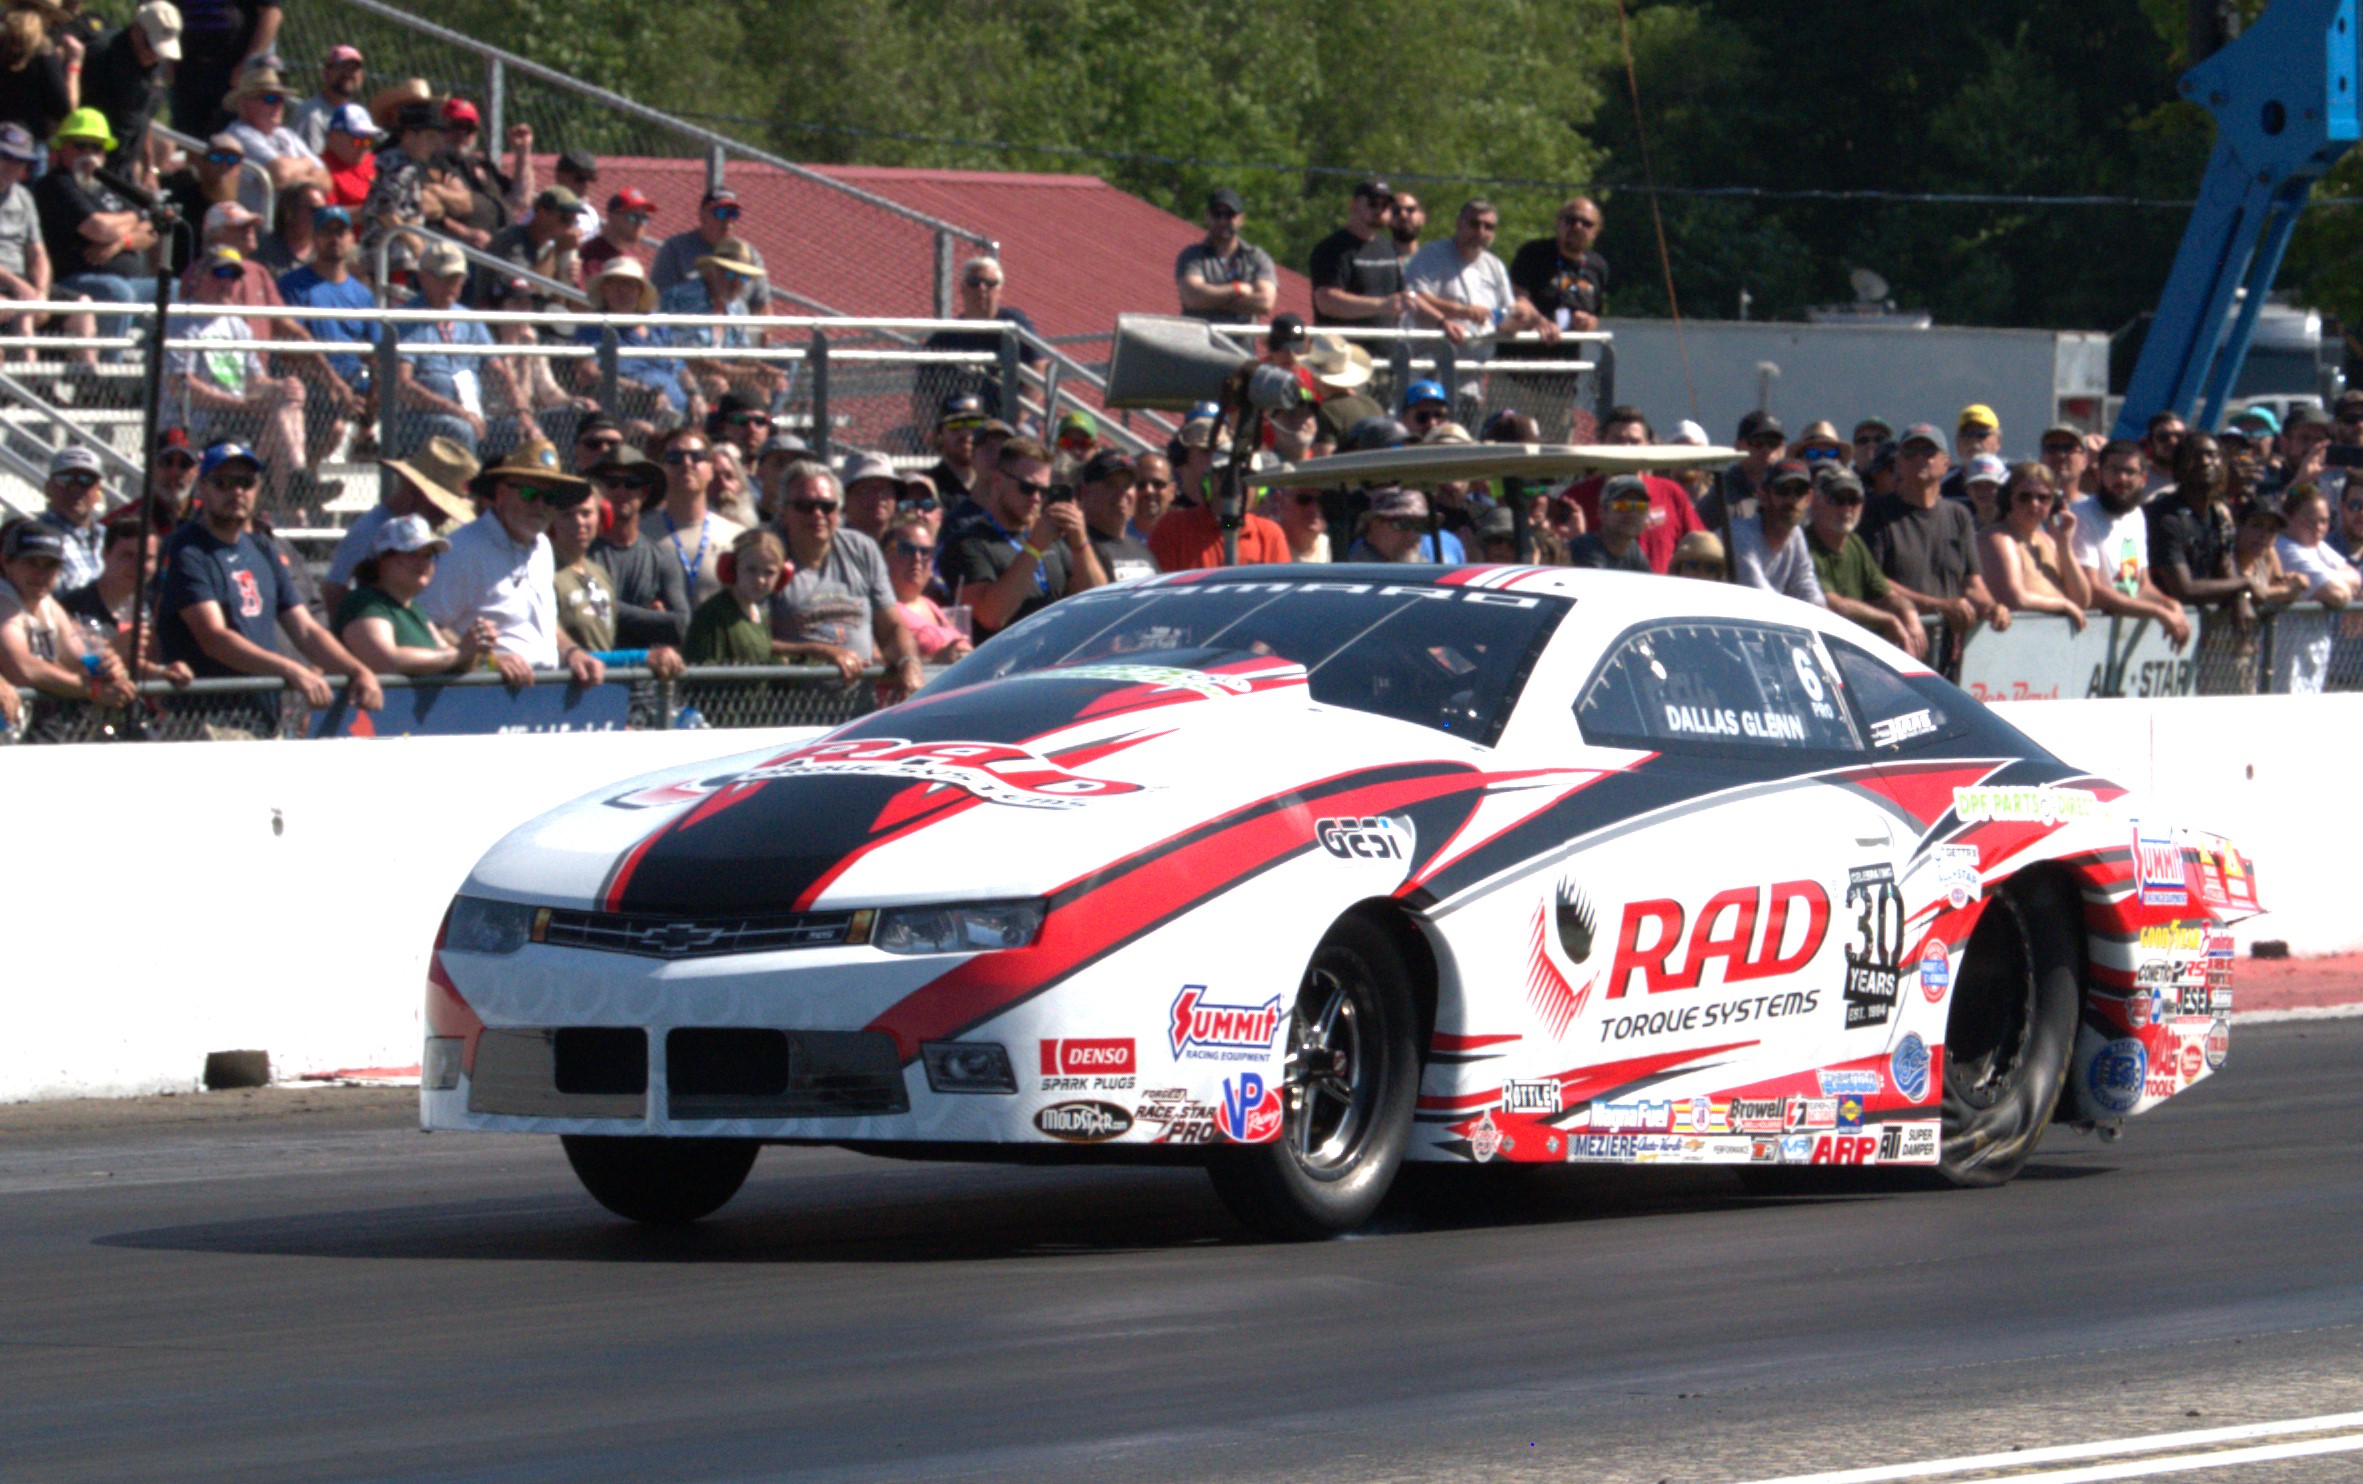 Dallas Glenn and the RAD Torque Systems Chevy launch at New England Dragway